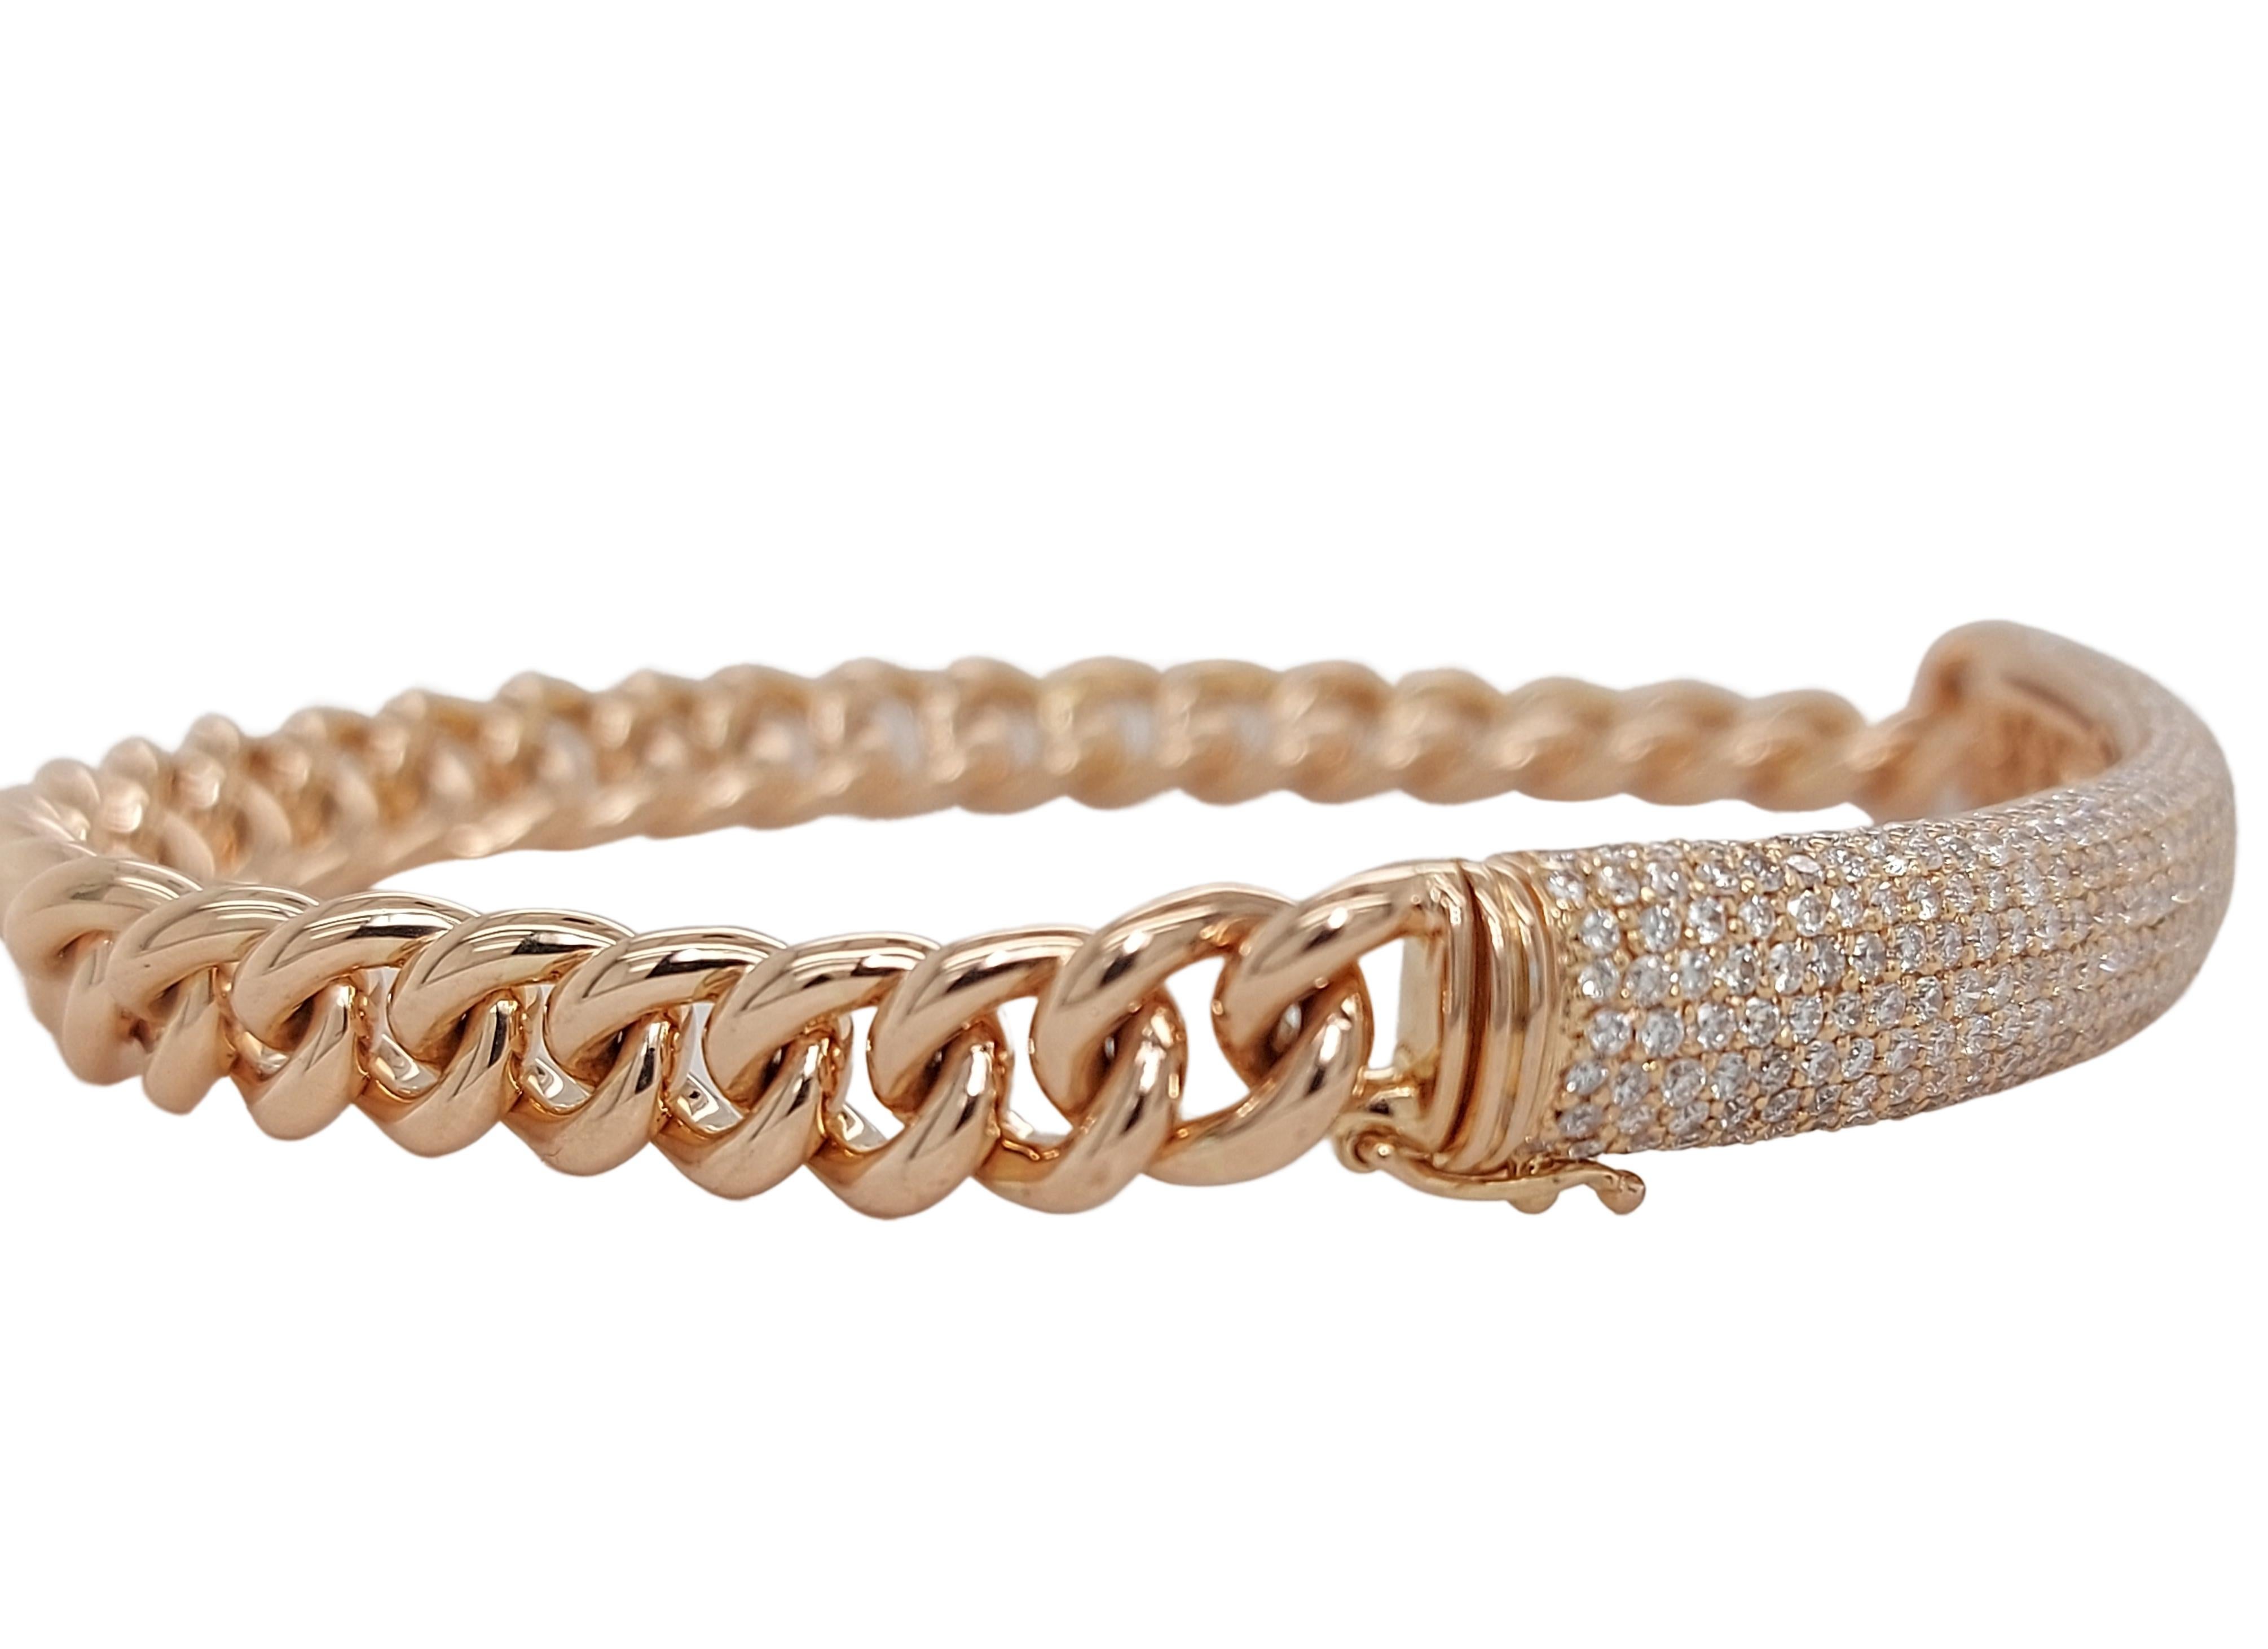 Stunning 18kt rose gold bracelet with 2.46ct diamonds

Diamonds: Brilliant cut diamonds together 2.46ct

Material: 18kt rose gold

Total weight: 32.4 gram / 1.145 oz / 20.9 dwt

Measurements: The bracelet is 18cm long so it will max fit a 18cm wrist